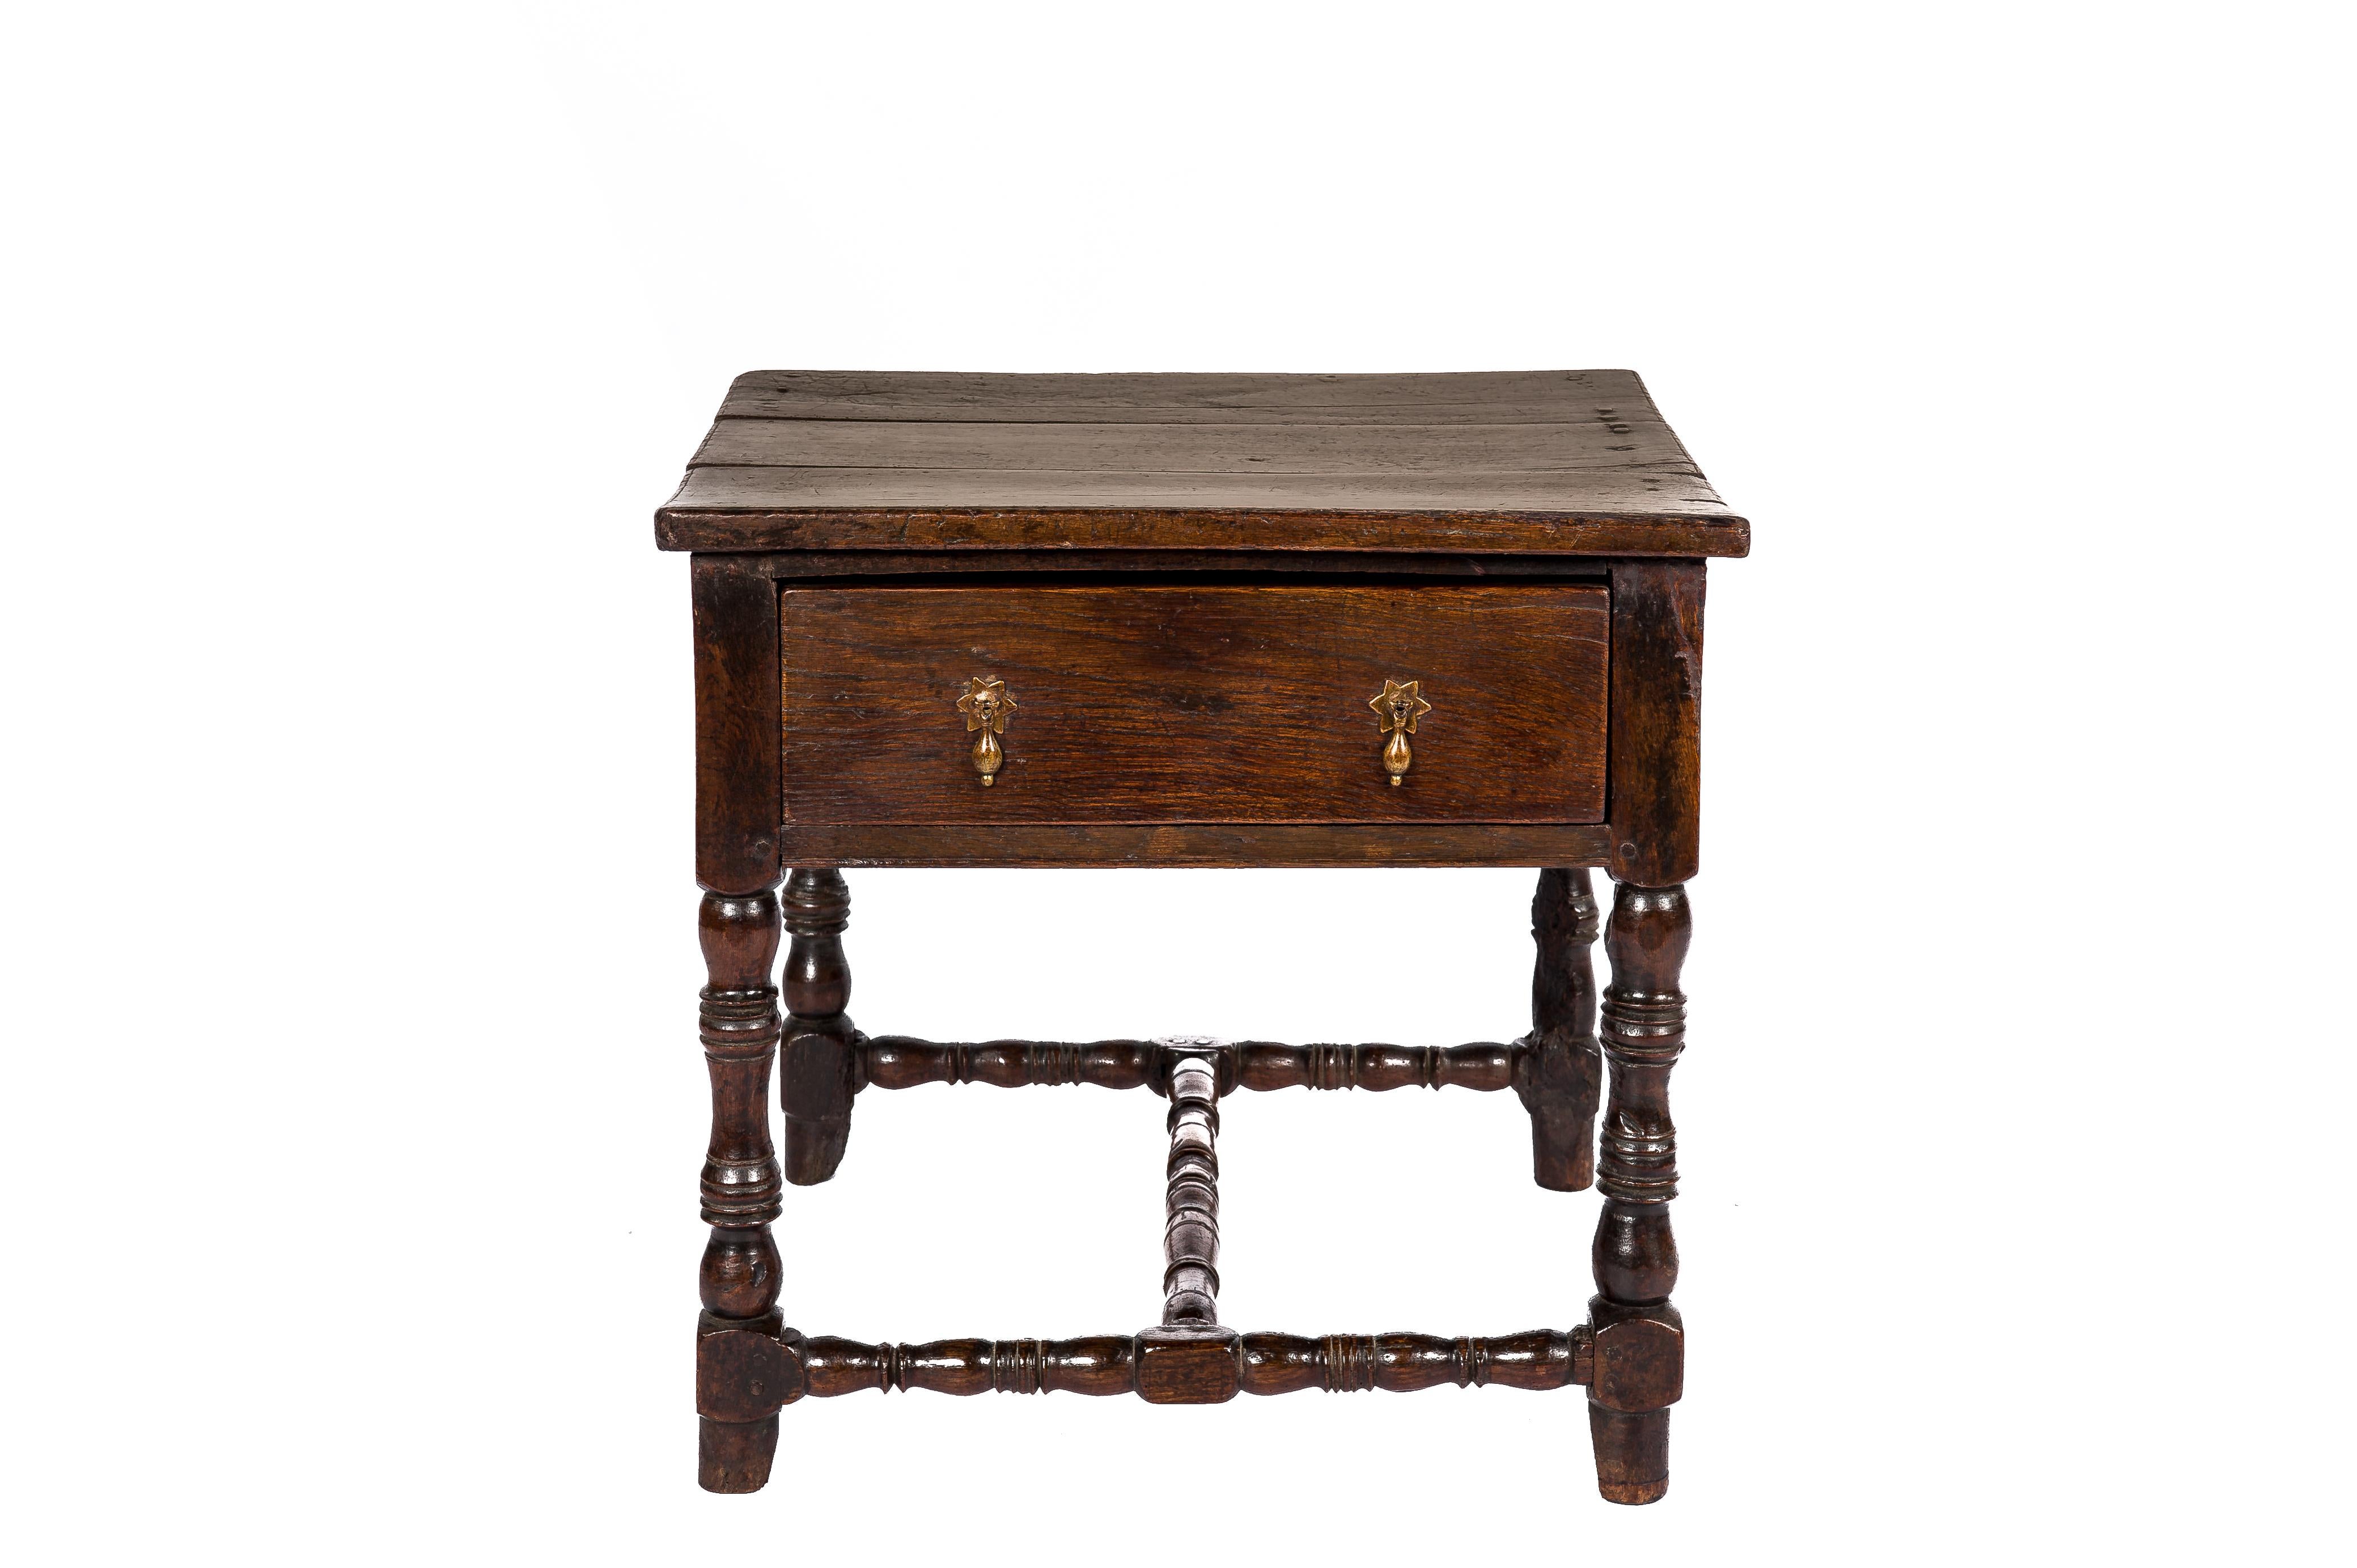 This is a fine-quality Charles II side table made in solid oak in the late 17th century. It has three plank bold top that was attached to the frame with wooden pens. The table has a single working full-length drawer, which features the original